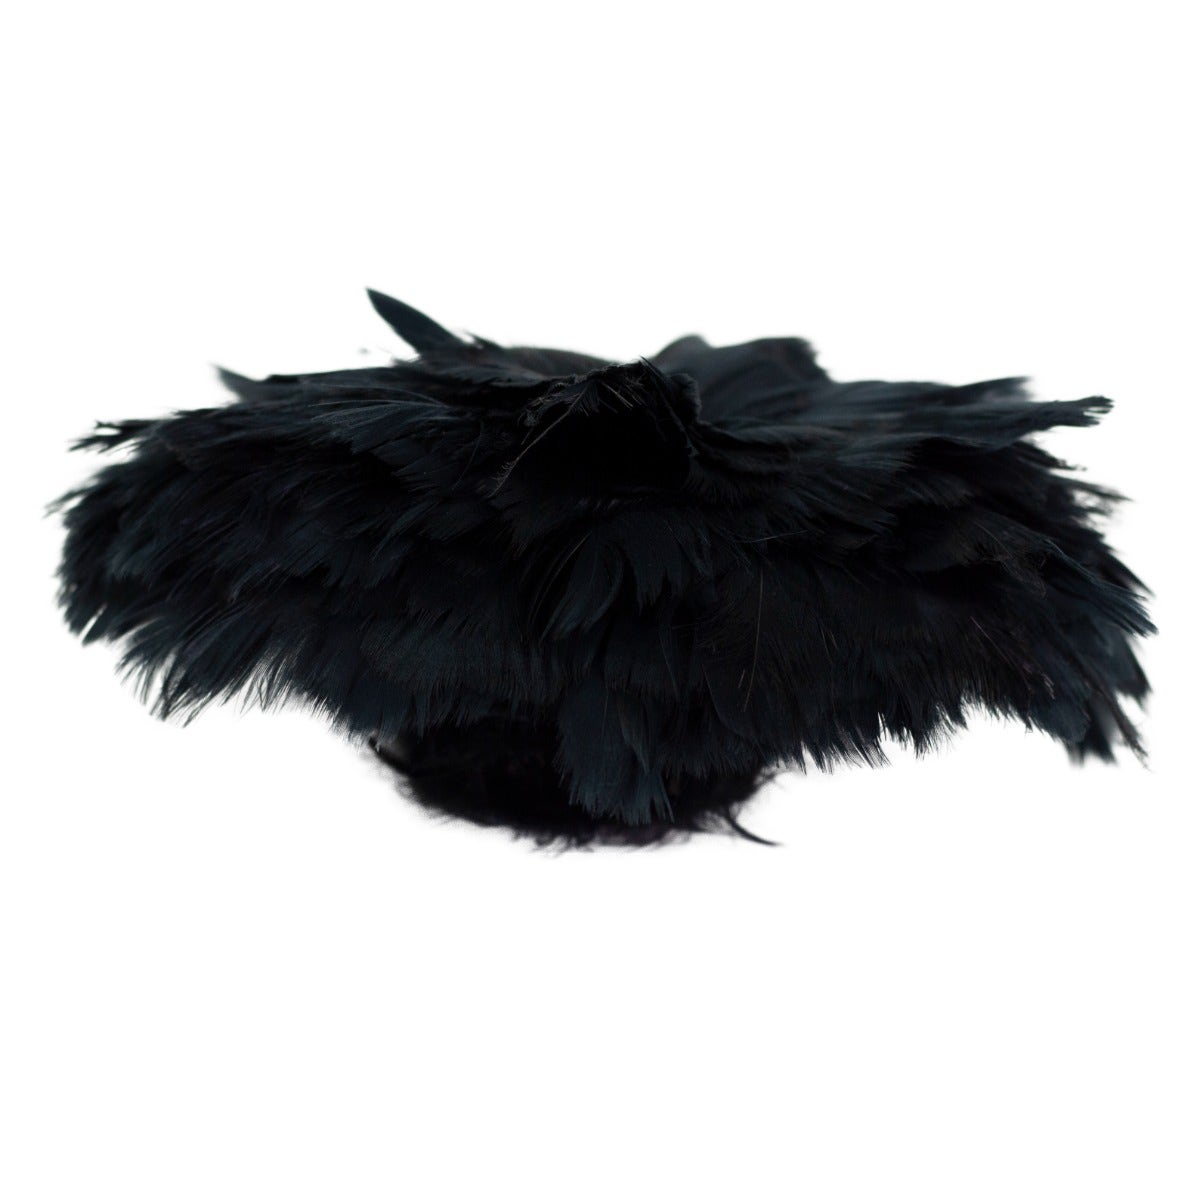 Strung Goose Coquille Feathers 3-4" -- 1/4 lb-Black